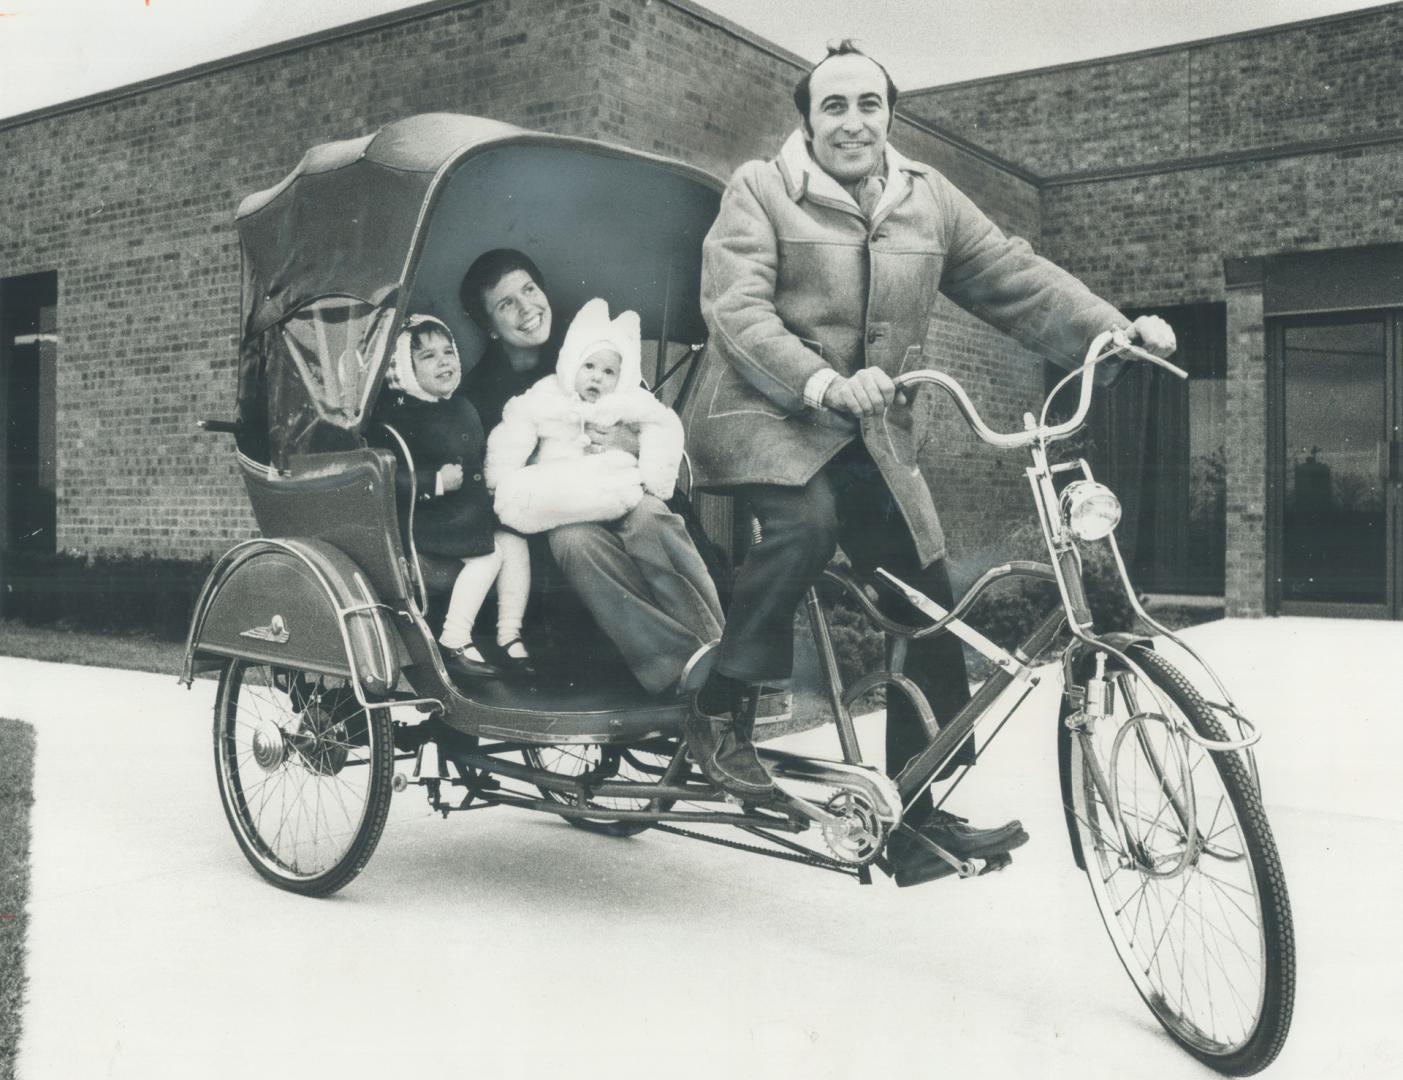 Is there a rickshaw in your future? The gasoline shortage doesn't bother Lorne Shields, a 30-year-old Downsview manufacturers' agent, as he takes his wife Suzanne and their daughters Jessica, 2, and Rebecca, 7 months, for a spin in the rickshaw be just imported from Taiwan to add to bicycle collection